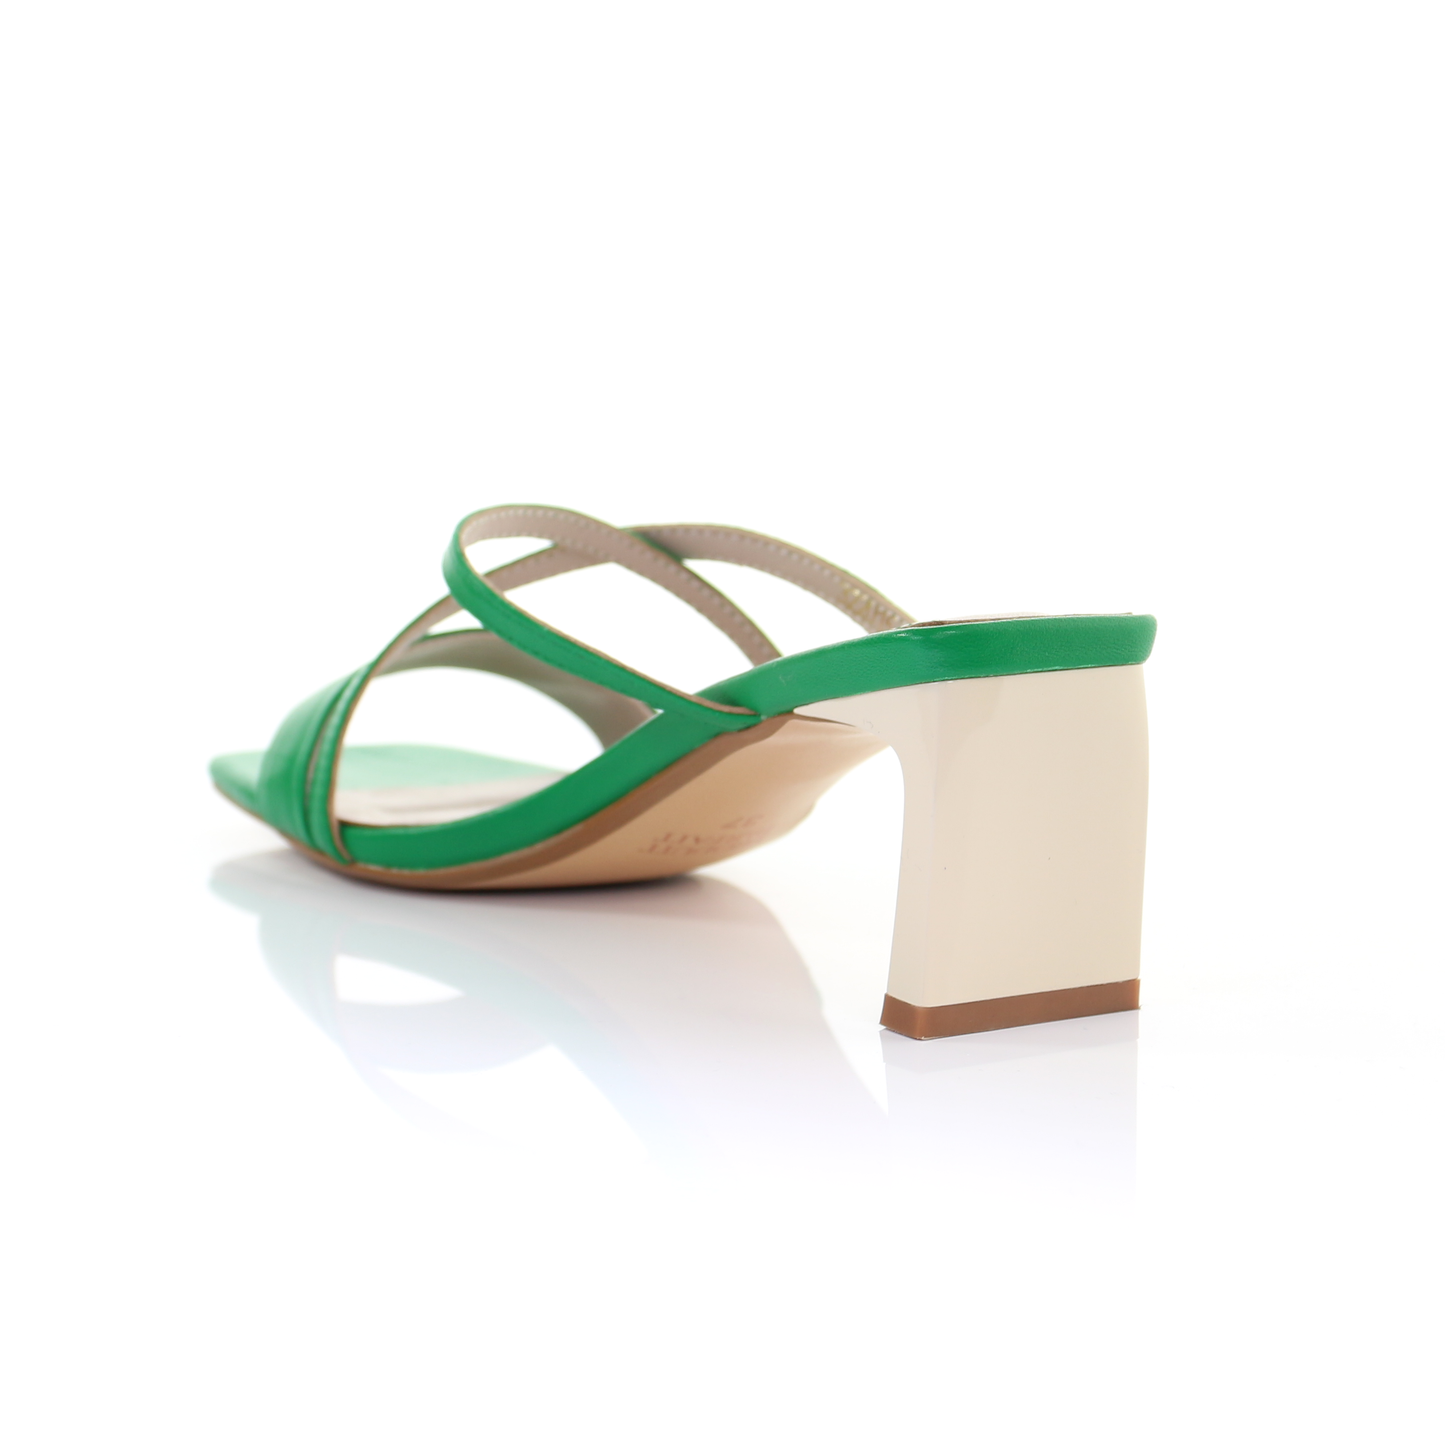 Square toe leather strappy heeled sandal- Green